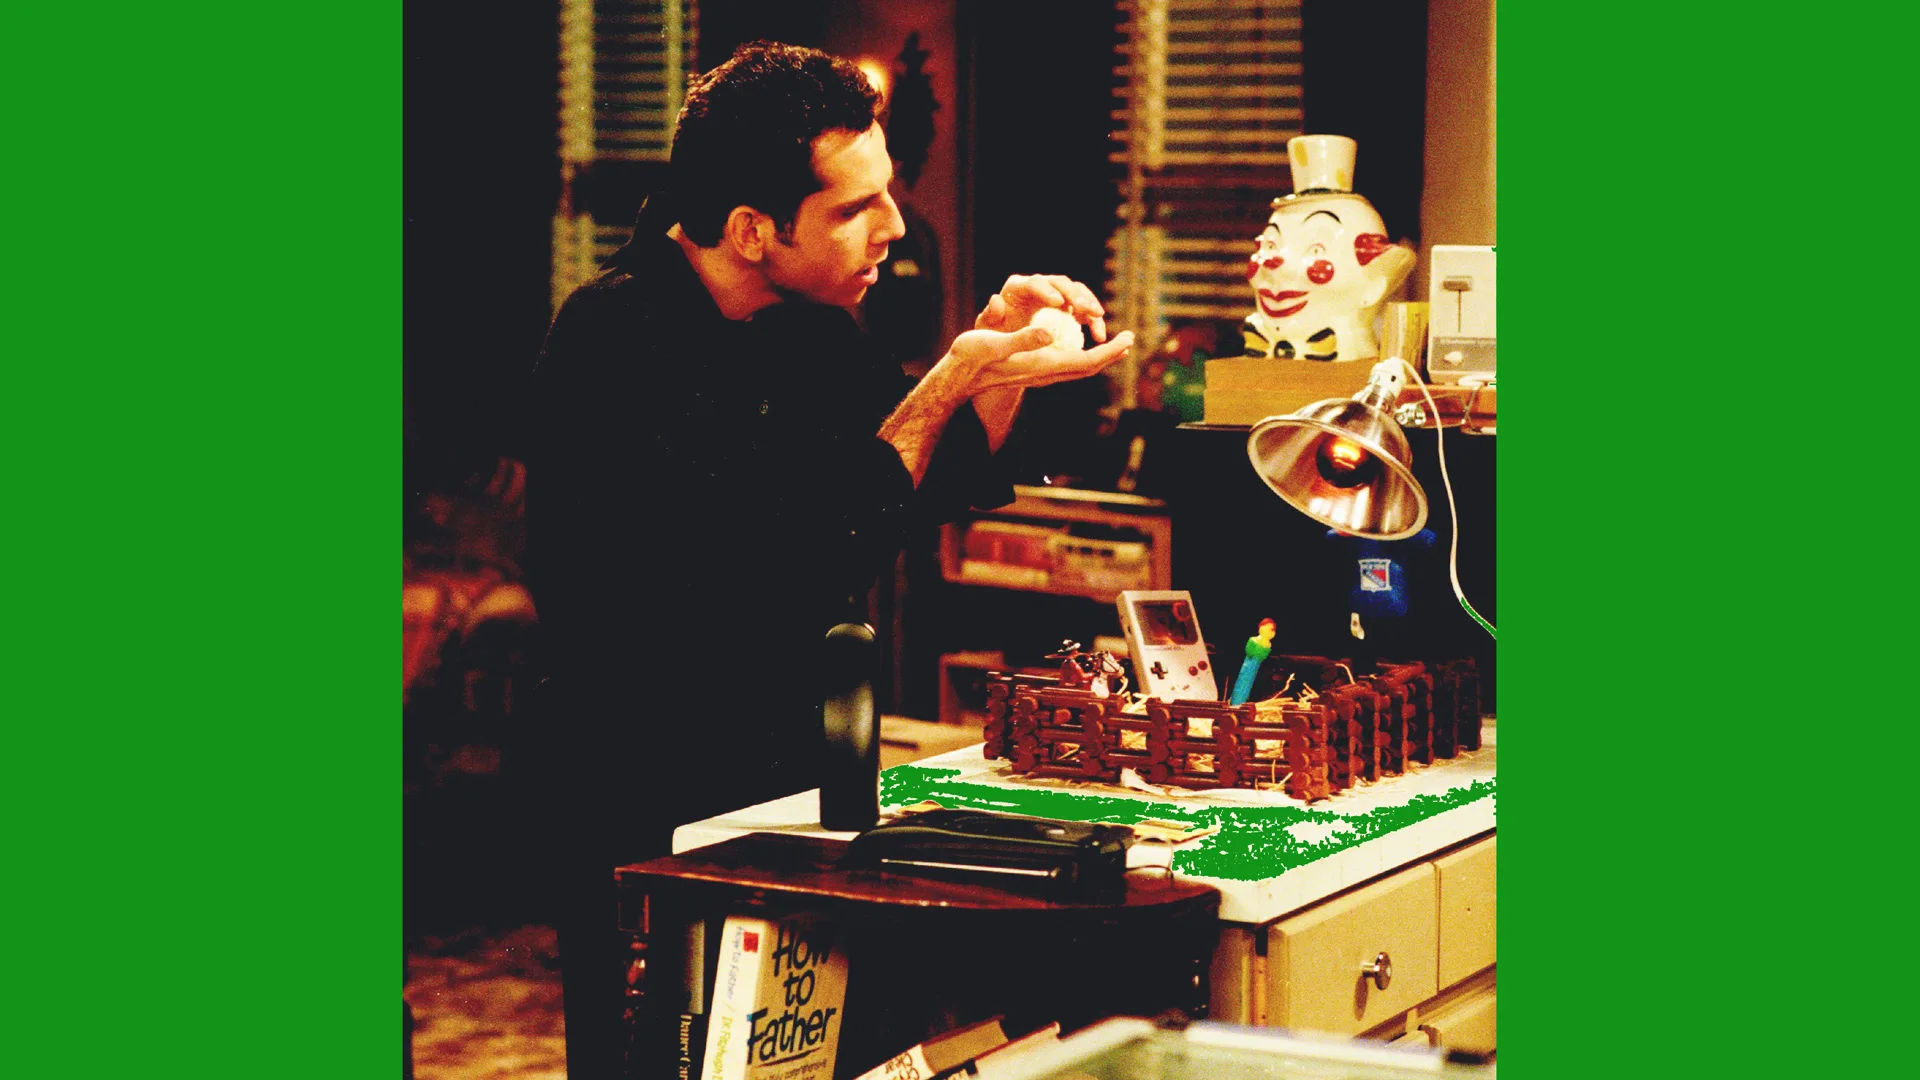 A photograph of the actor Ben Stiller in the series Friends holding a lightbulb next to a lit up clown shaped lamp in a library or livingroom setting